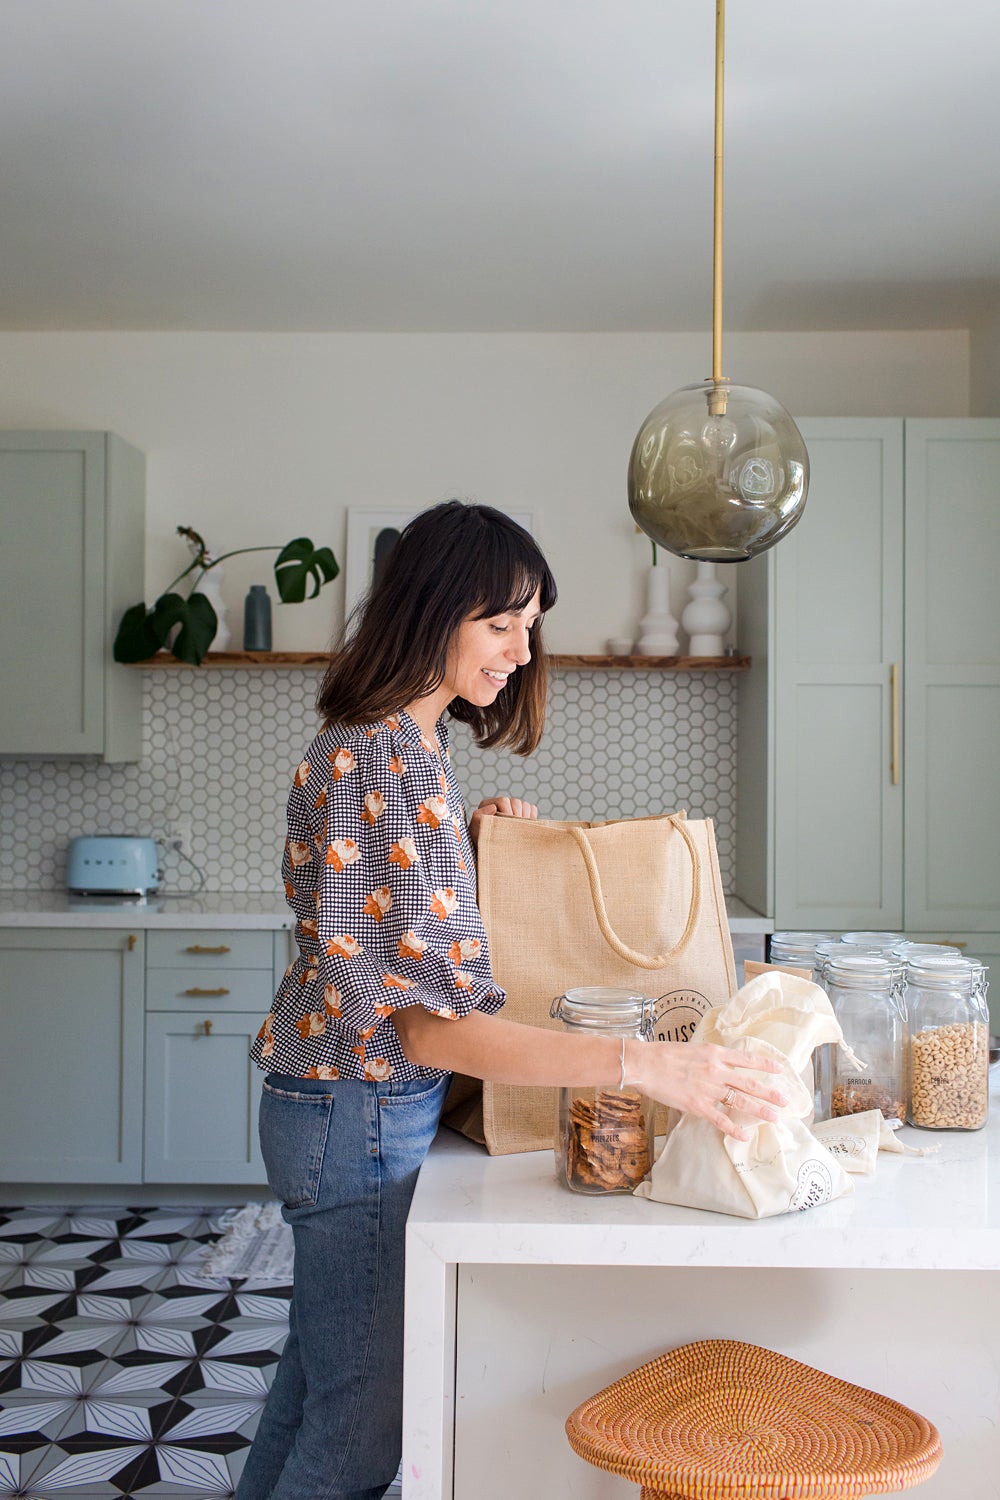 A Pro Organizer Taught Me the Secret to Making Snack Time Less of a Thing